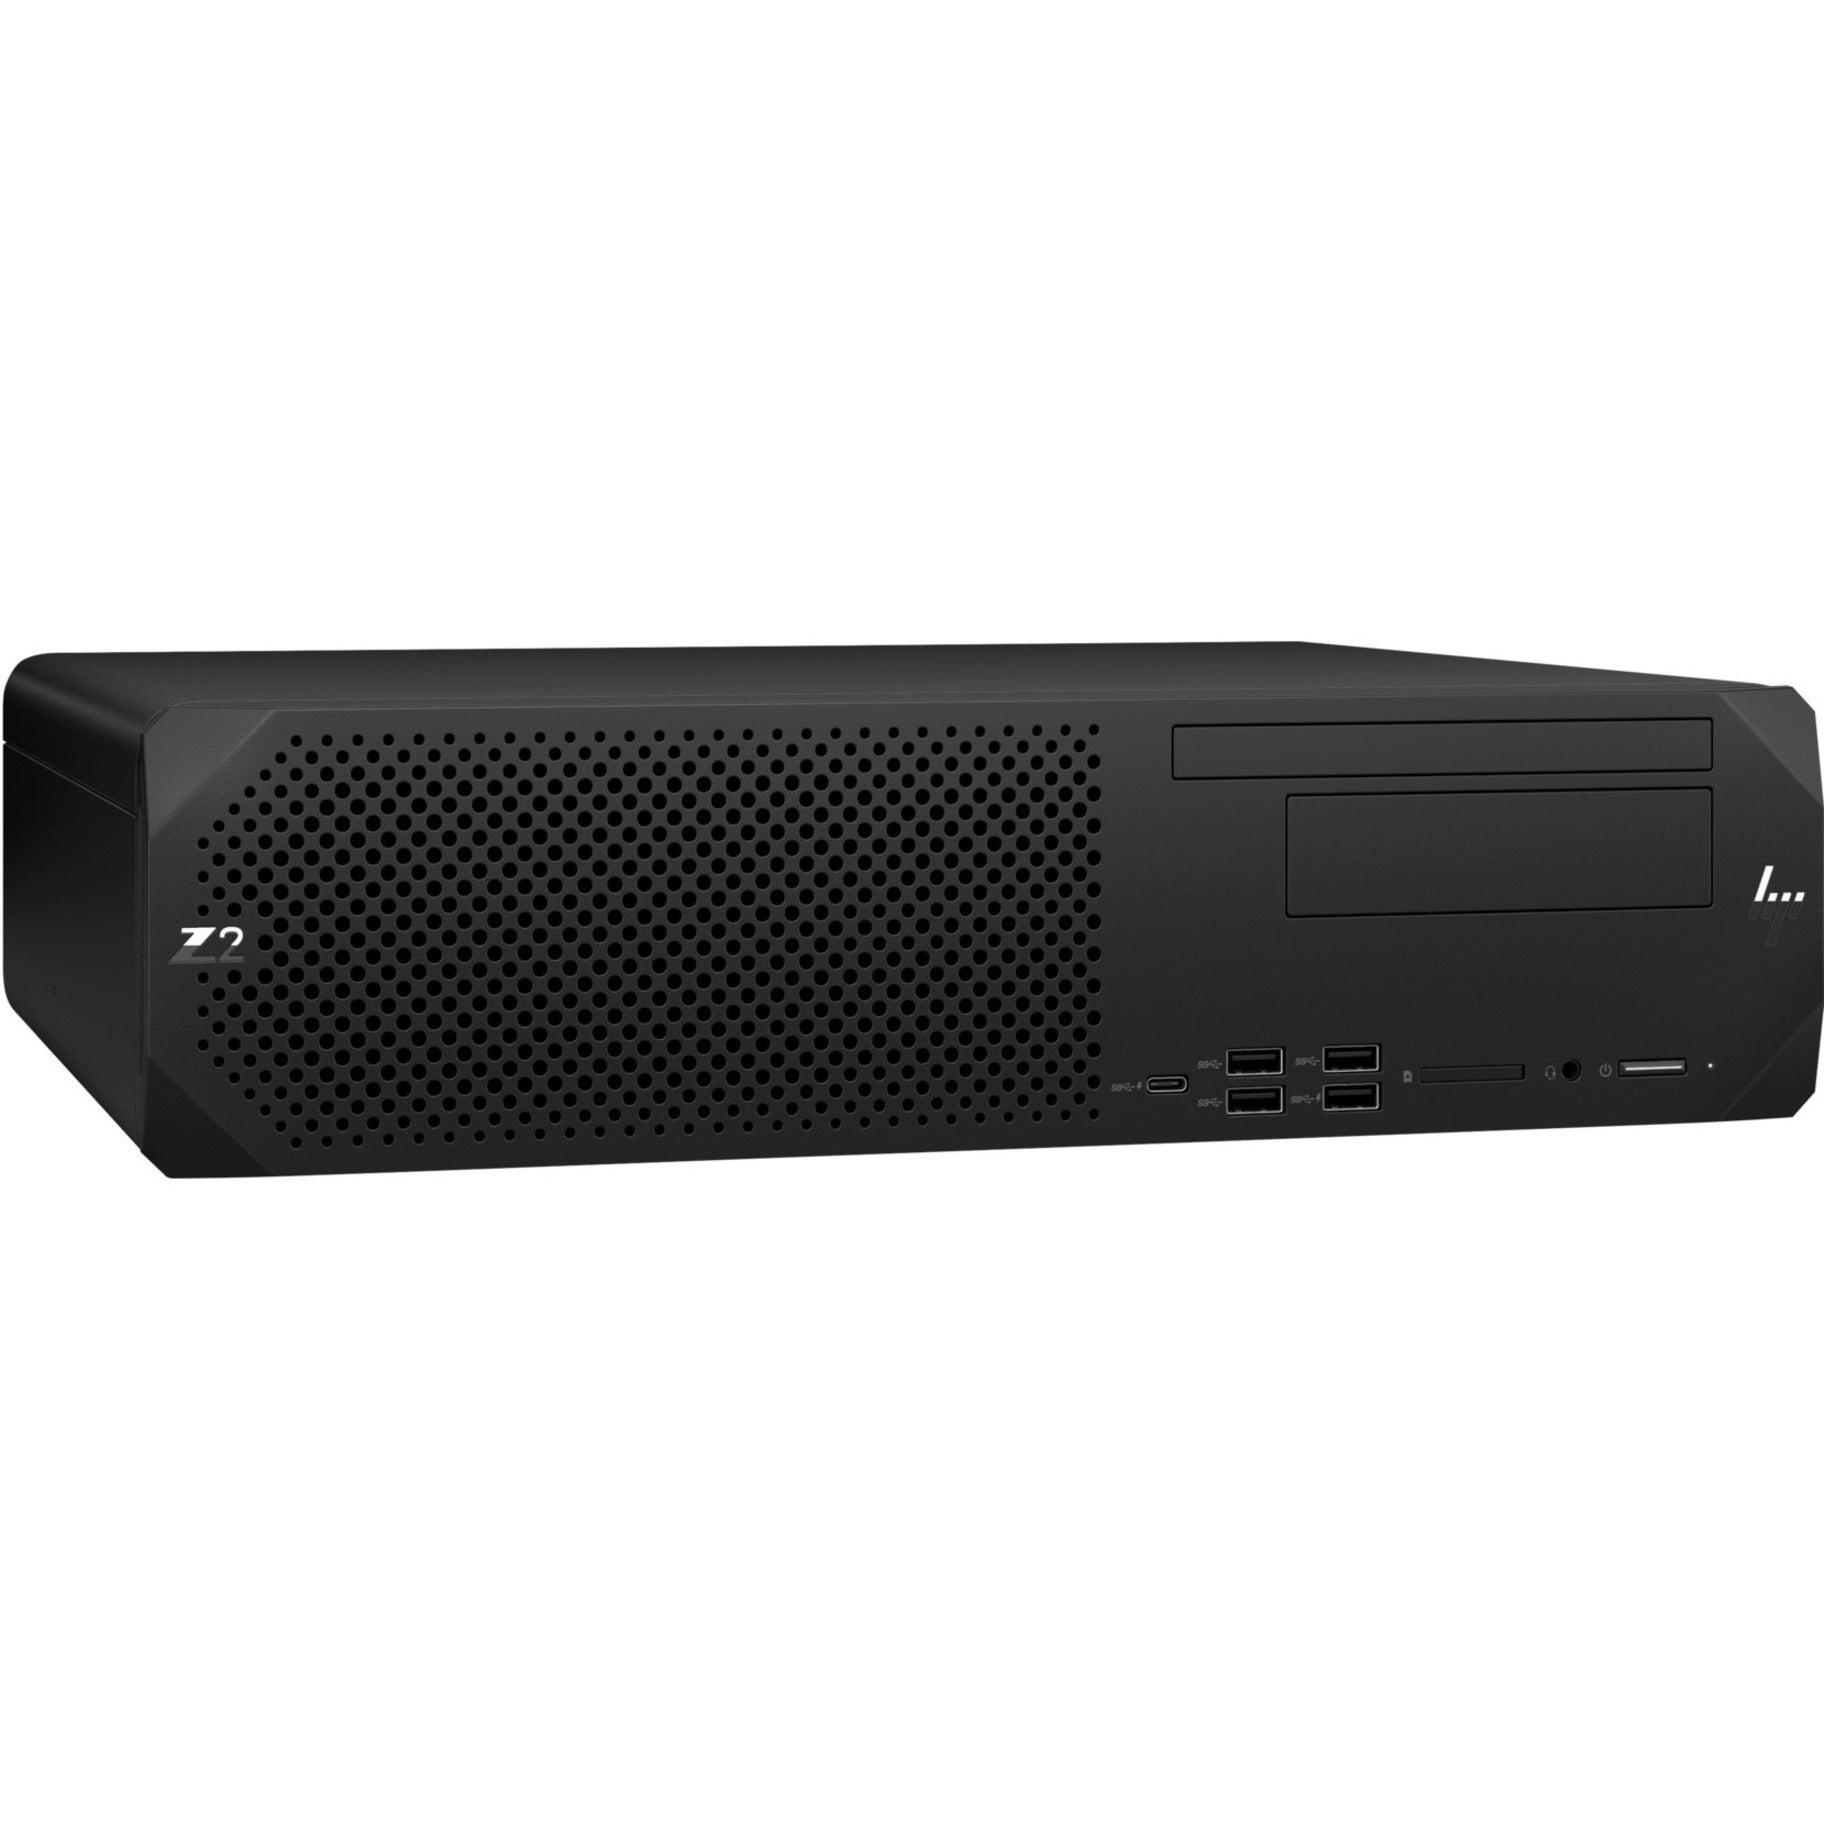 HP Z2 G9 Workstation - Intel Core i9 Hexadeca-core - 32GB RAM - 1TB SSD - Small Form Factor [Discontinued]